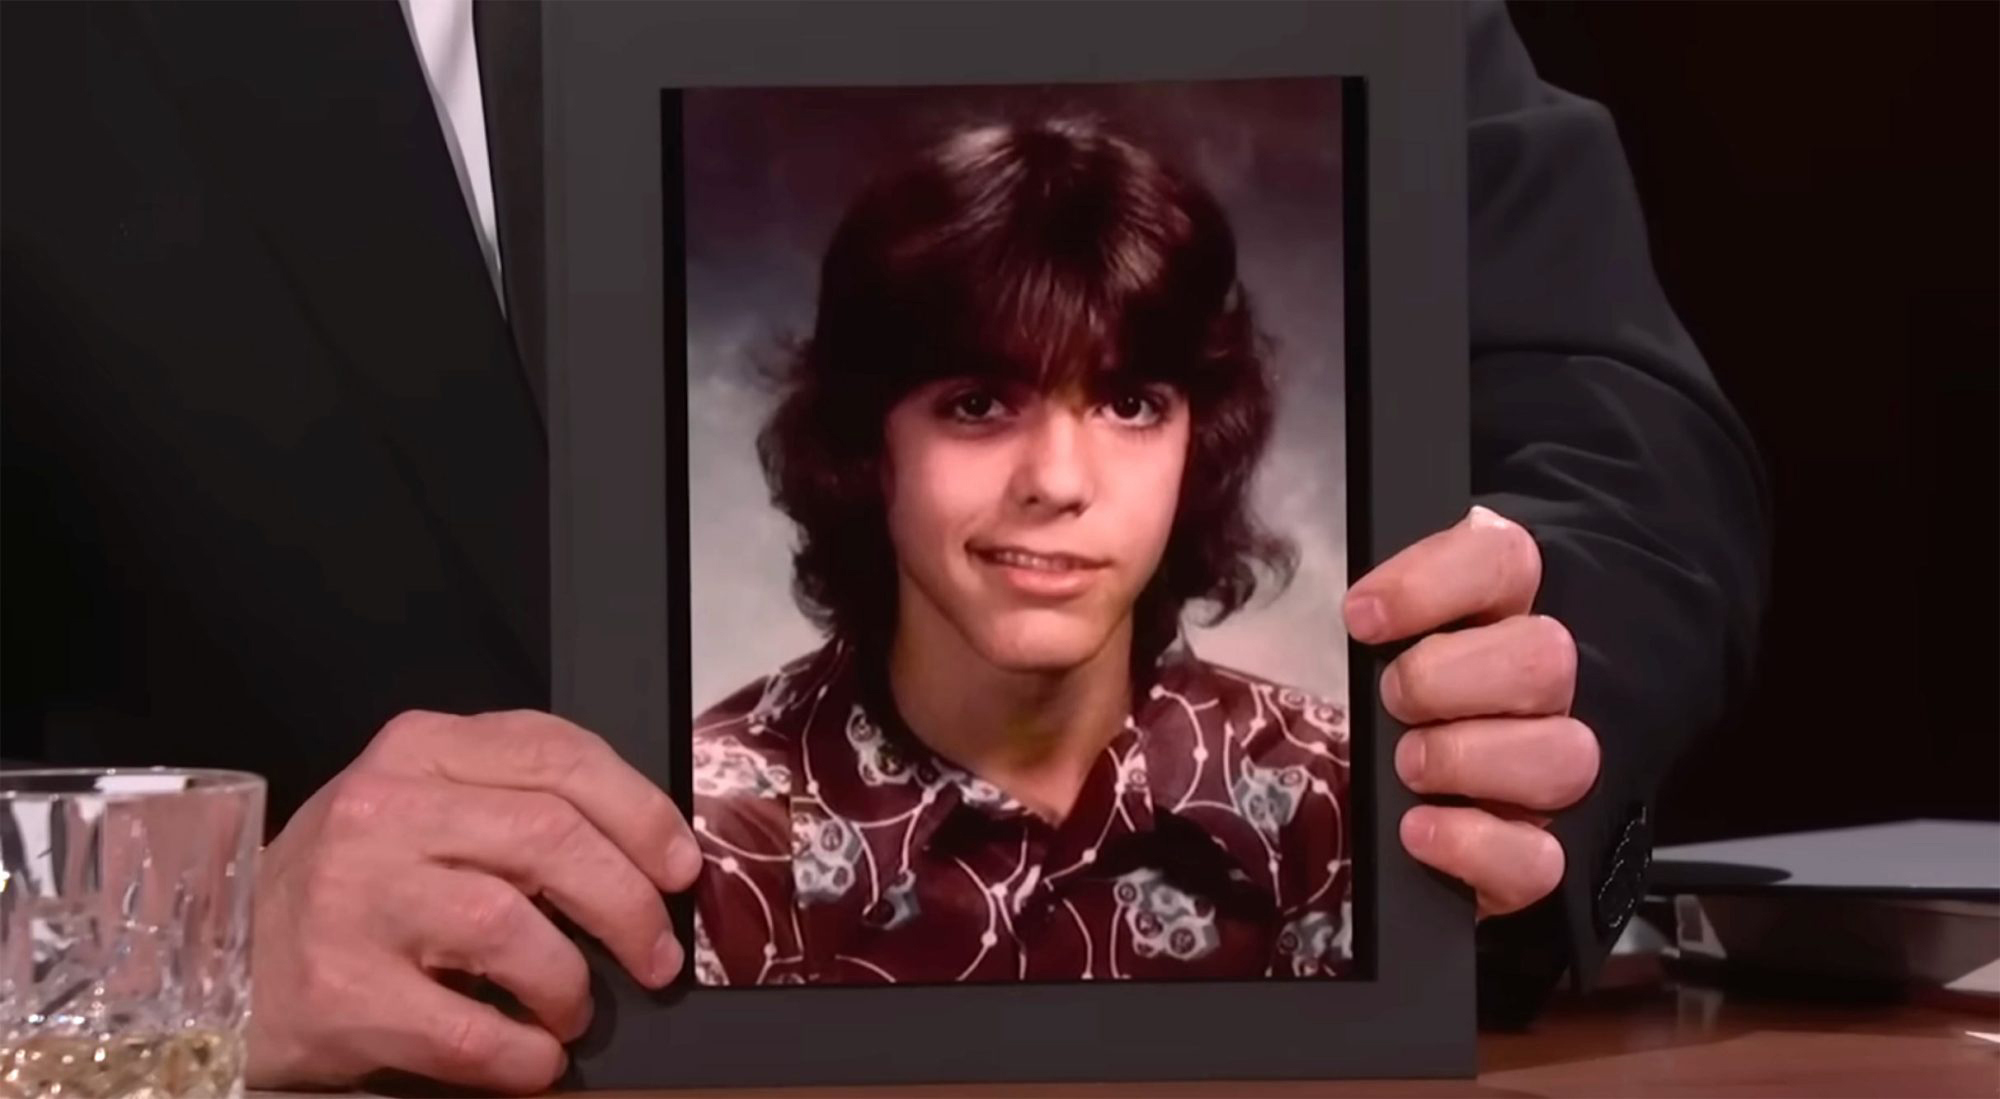 George Clooney appears in a high school photo while suffering from Bells palsy.